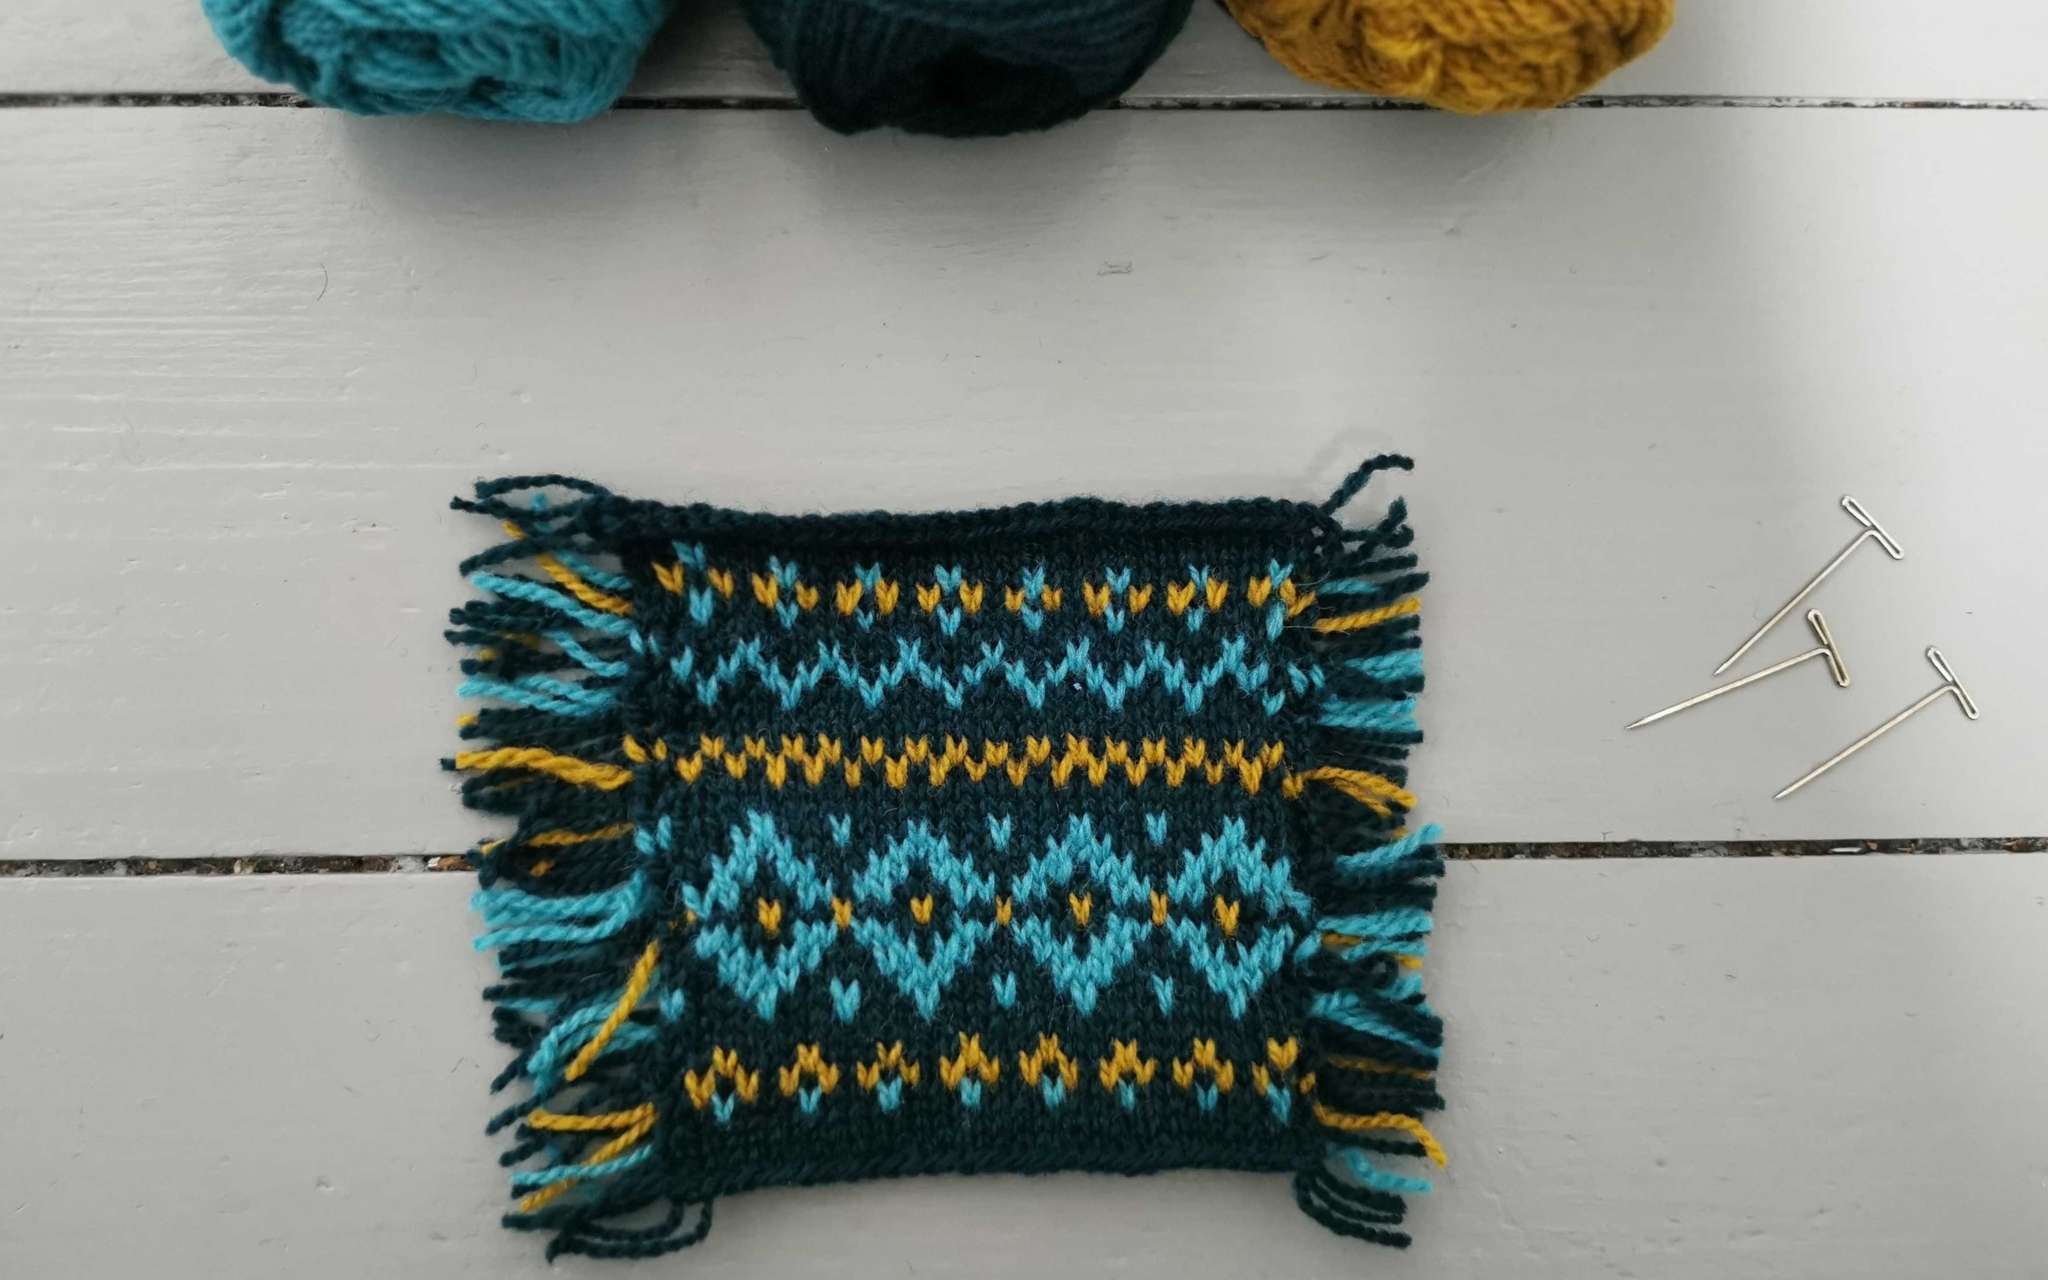 a square knitted swatch in navy, gold and teal colourwork. Three balls of yarn peak out at the top of the image and lay on a grey wooden surface